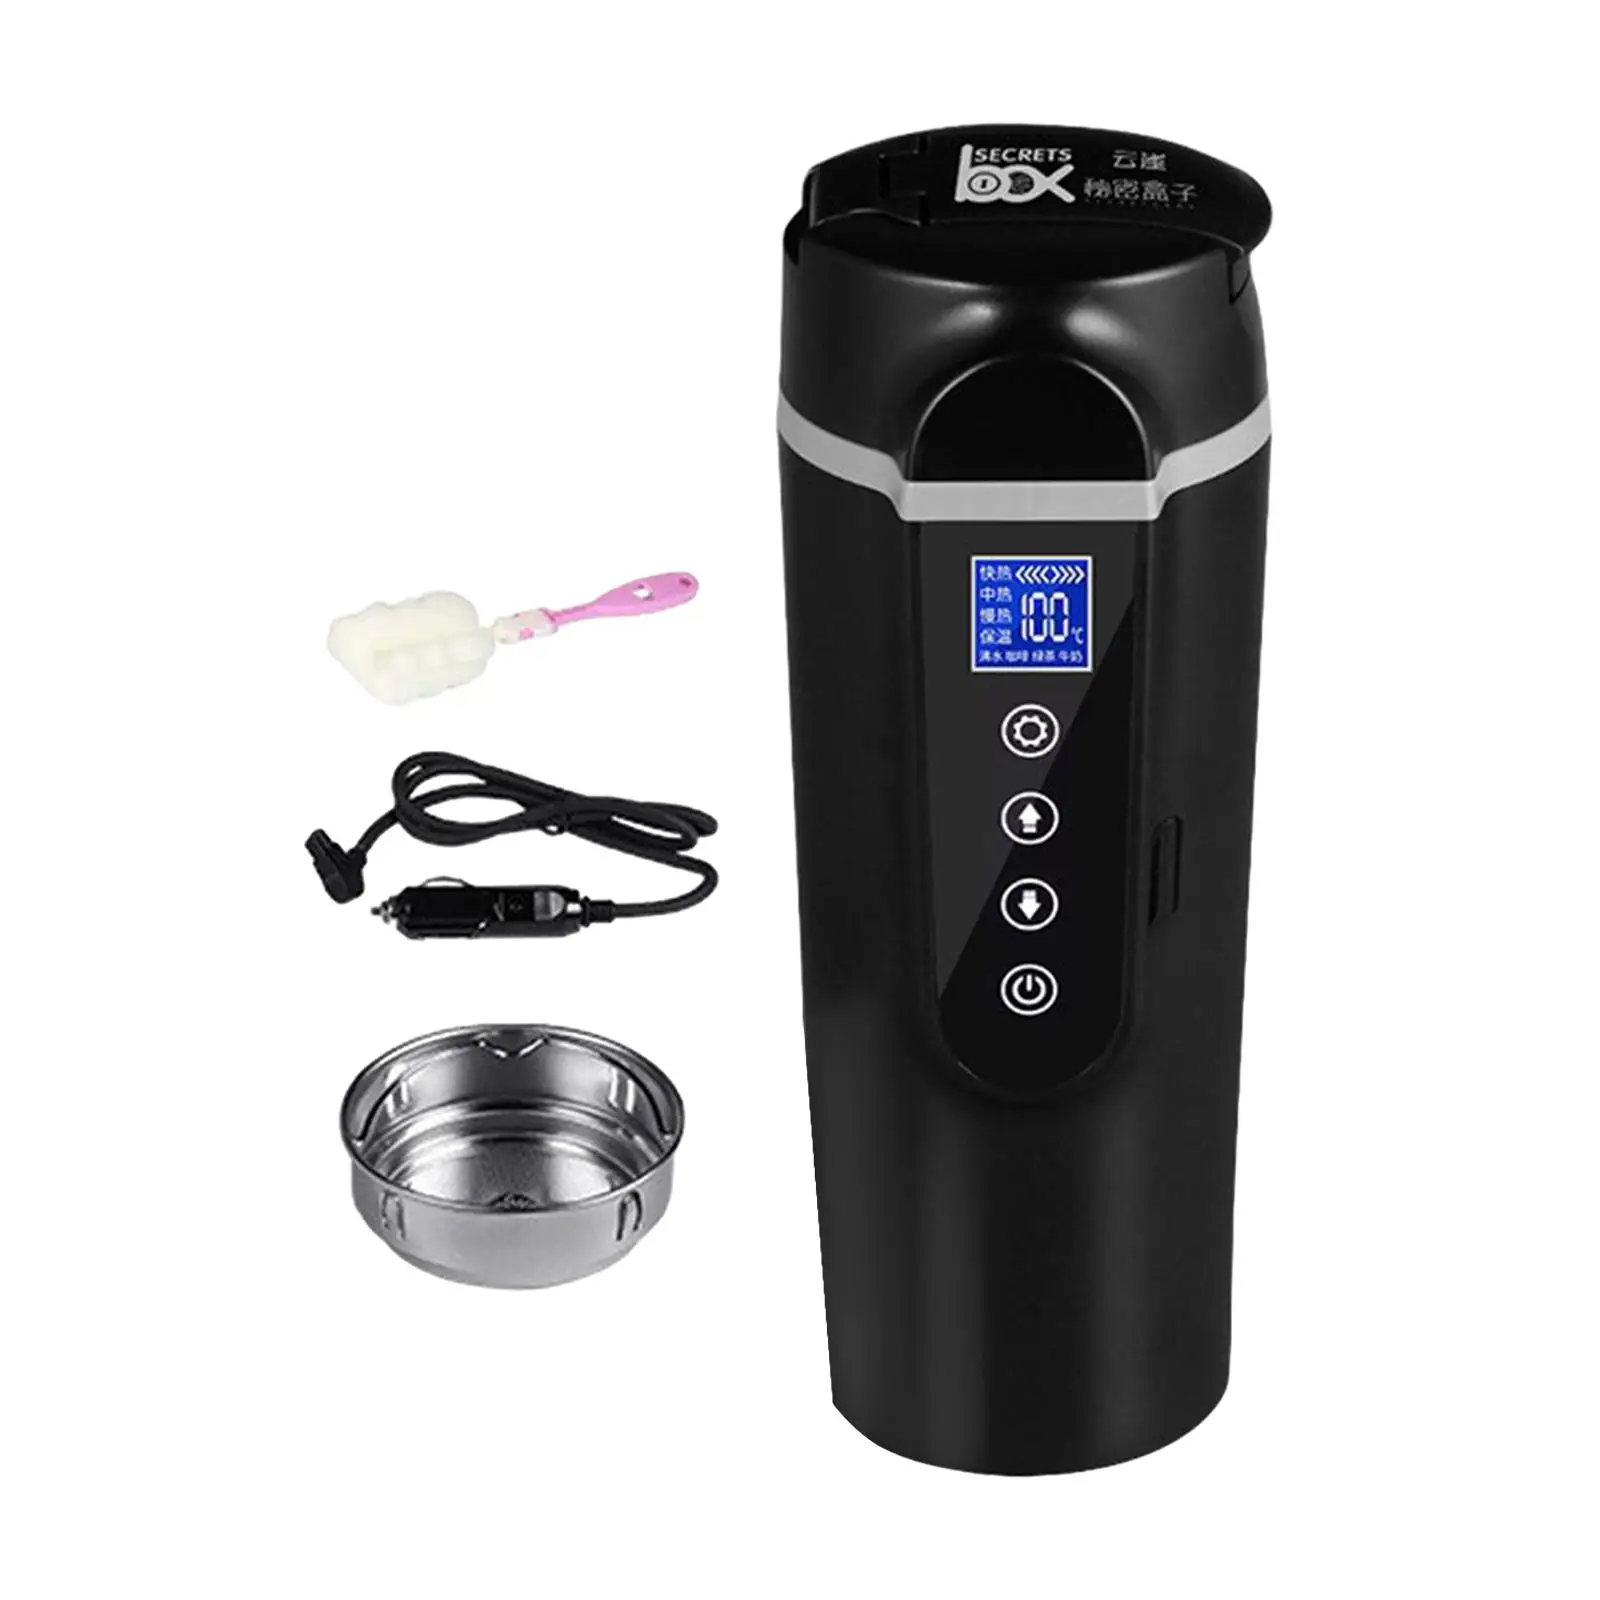 Car Heating Cup 24V/12V Traveling Kettle for Camping Auto Car Tea Water Milk